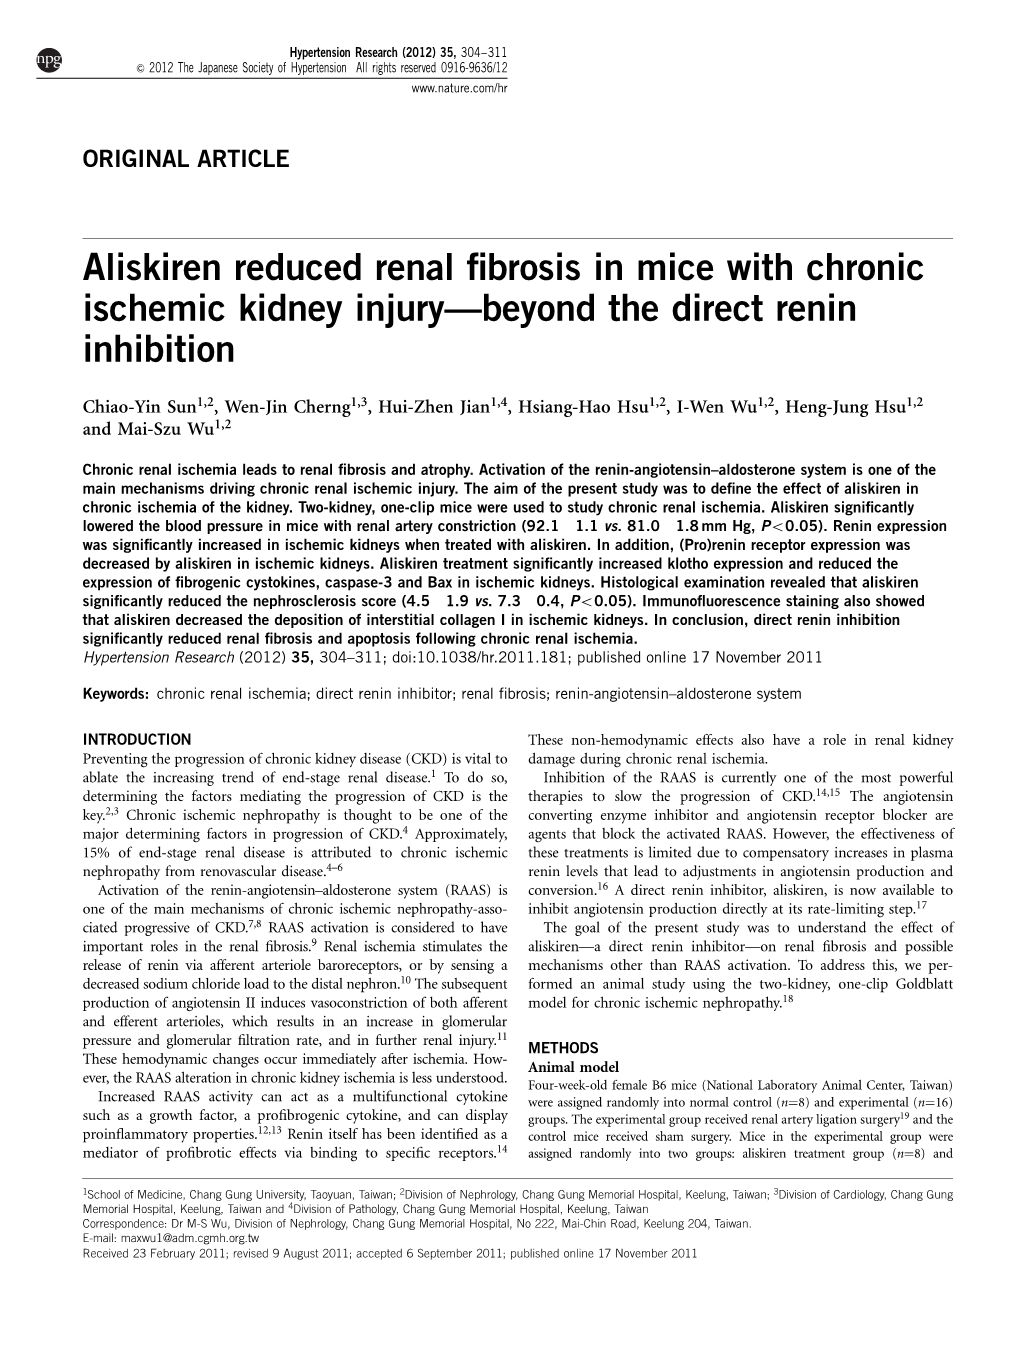 Aliskiren Reduced Renal Fibrosis in Mice with Chronic Ischemic